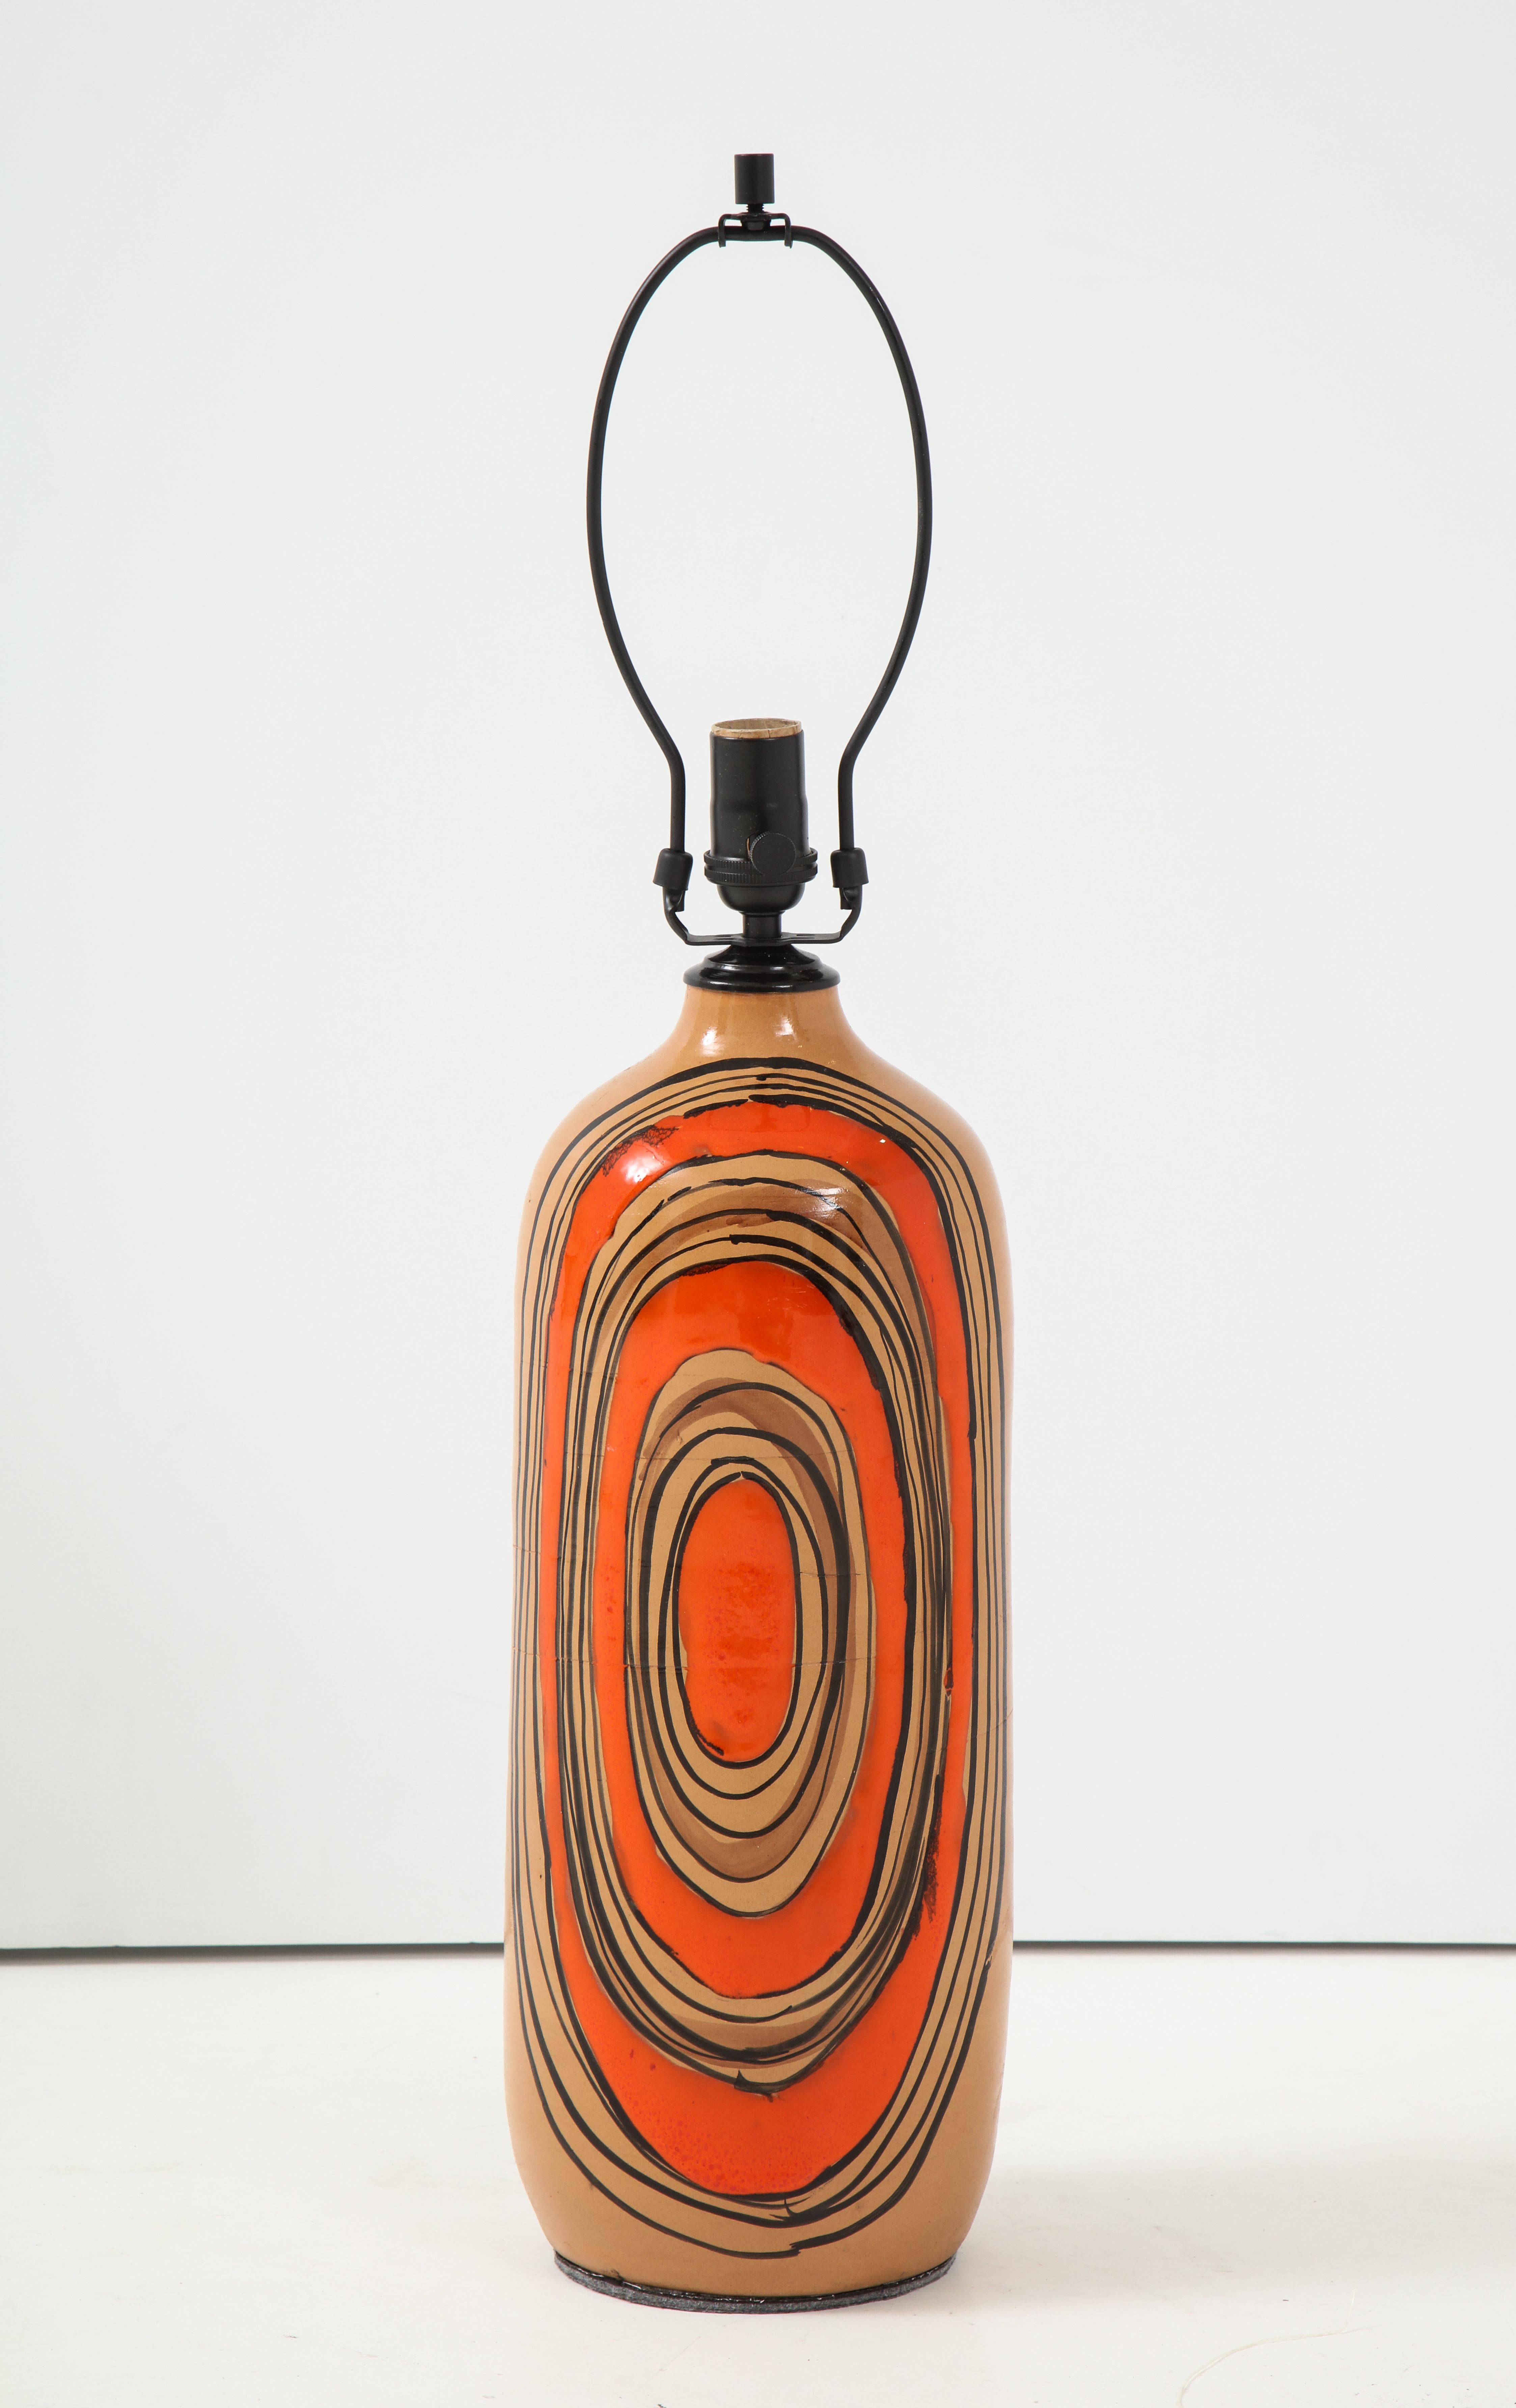 Pair of modern ceramic lamps with a sand colored glazed bodies and contrasting orange and black exuberant ovals, Signed on bottom. Rewired, 100W max bulbs.